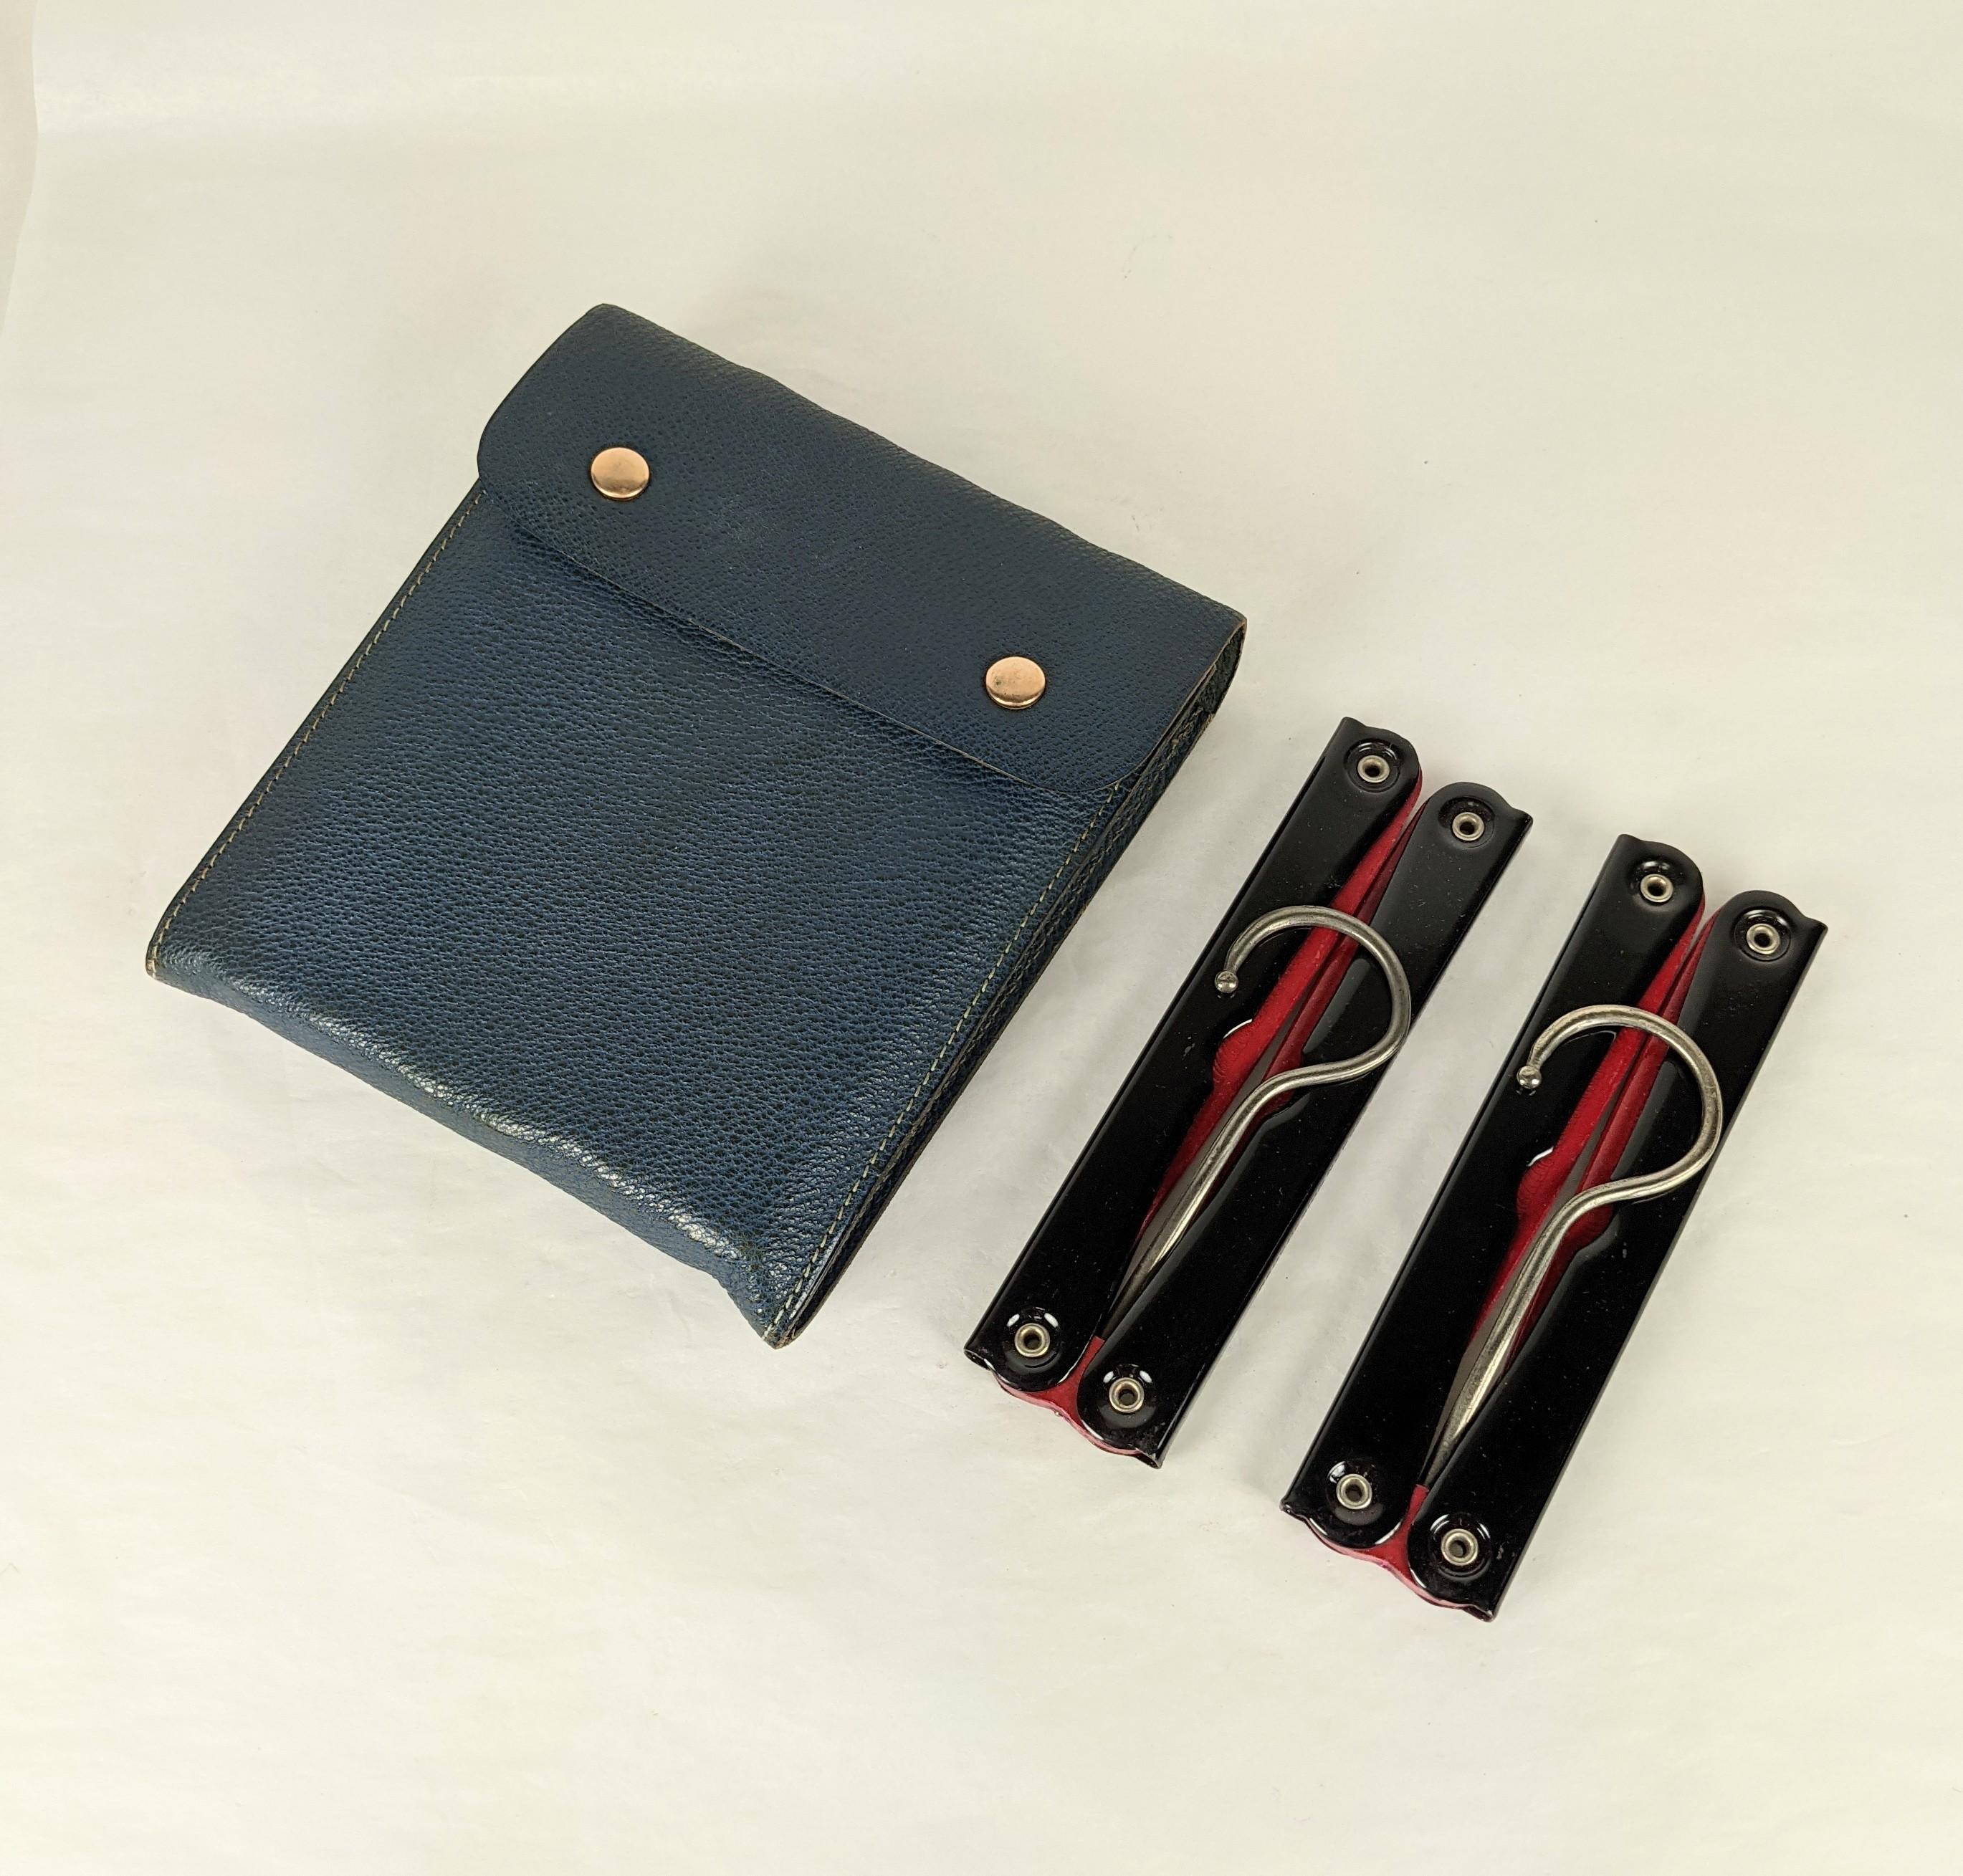 Charming Art Deco Travel Hangers in blue leather case with 6 collapsible stained wood and metal hangers in the set.
 5